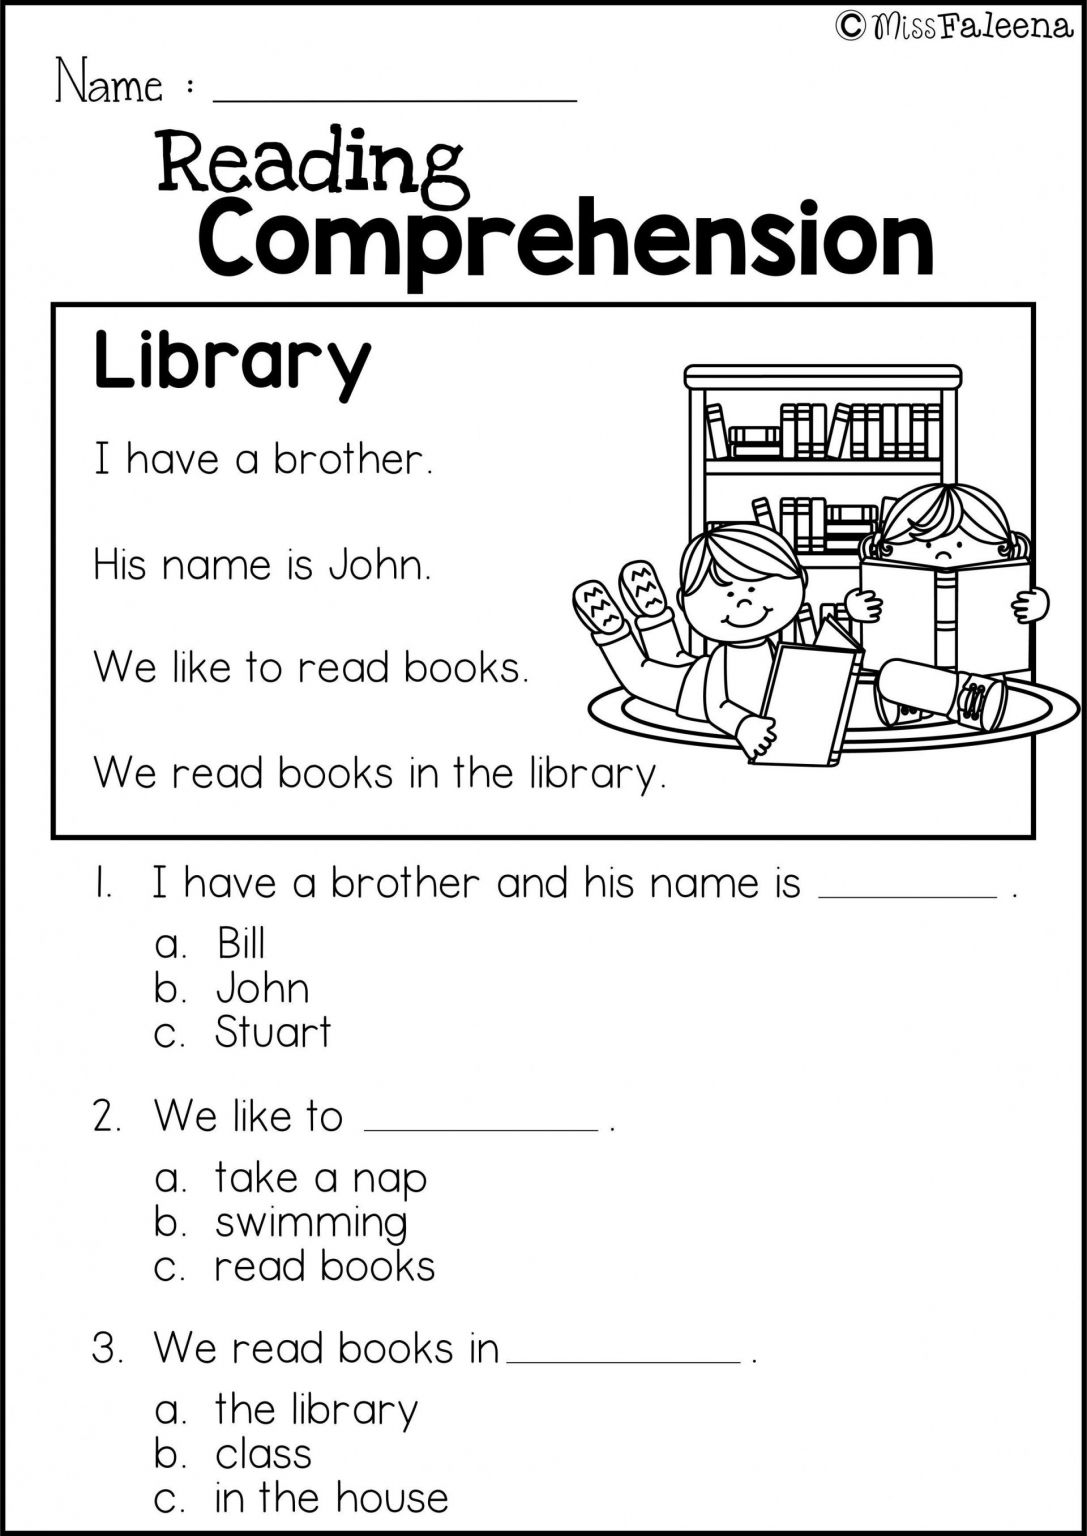 4 Free Math Worksheets First Grade 1 Subtraction Subtract 2 Digit Numbers No Regrouping AMP